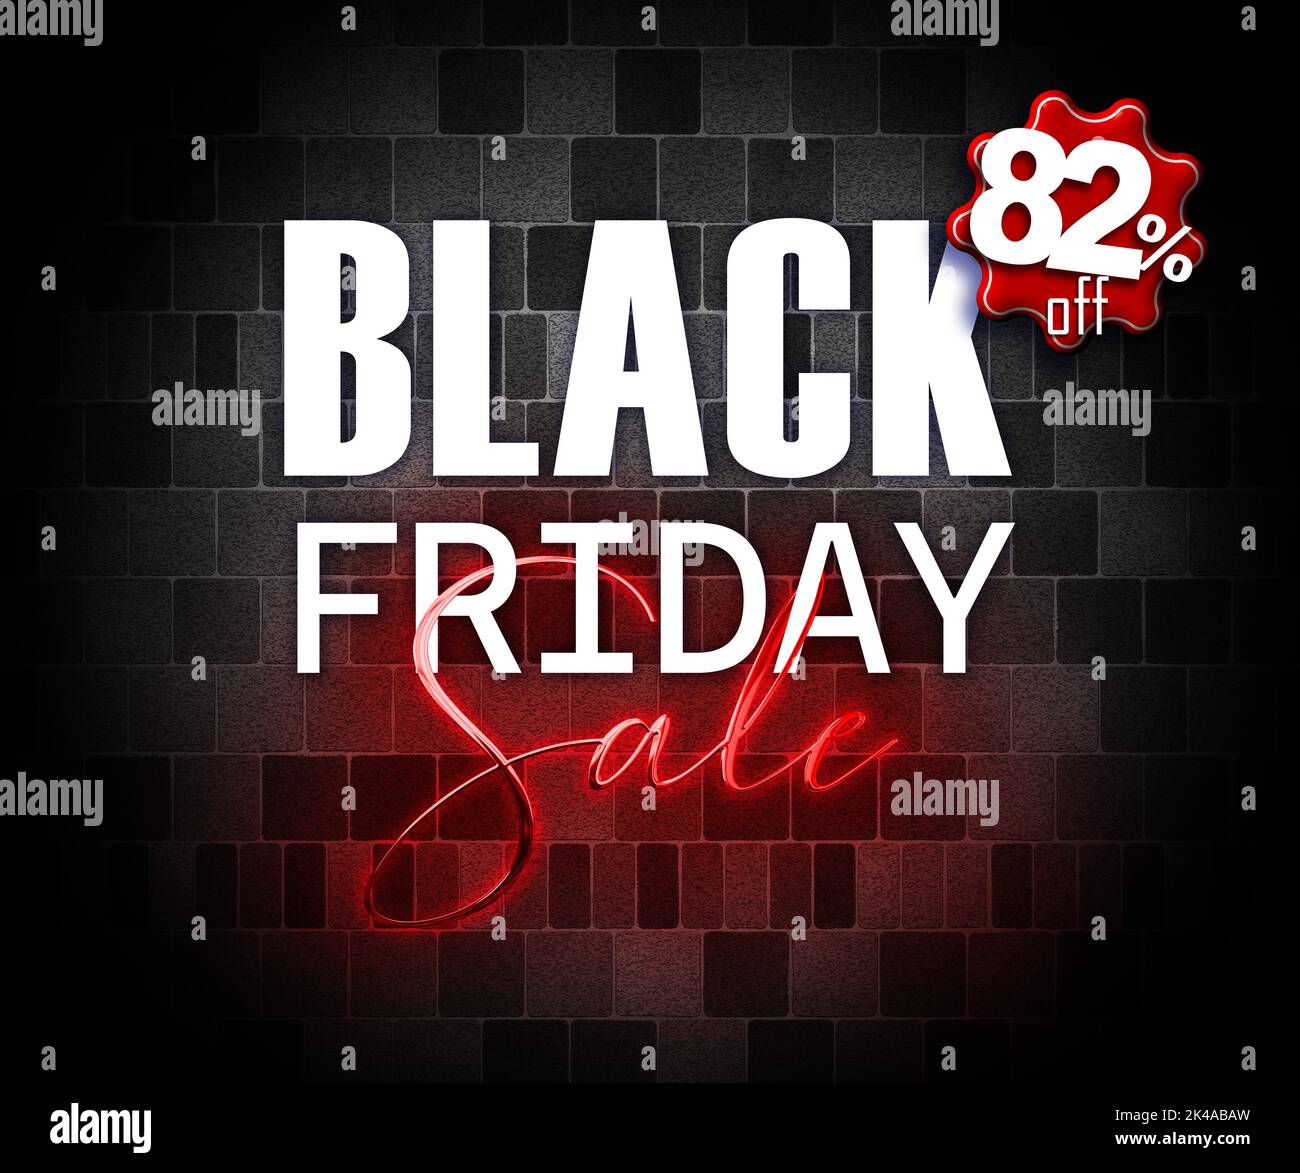 illustration with 3d elements black friday promotion banner 82 percent off sales increase Stock Photo